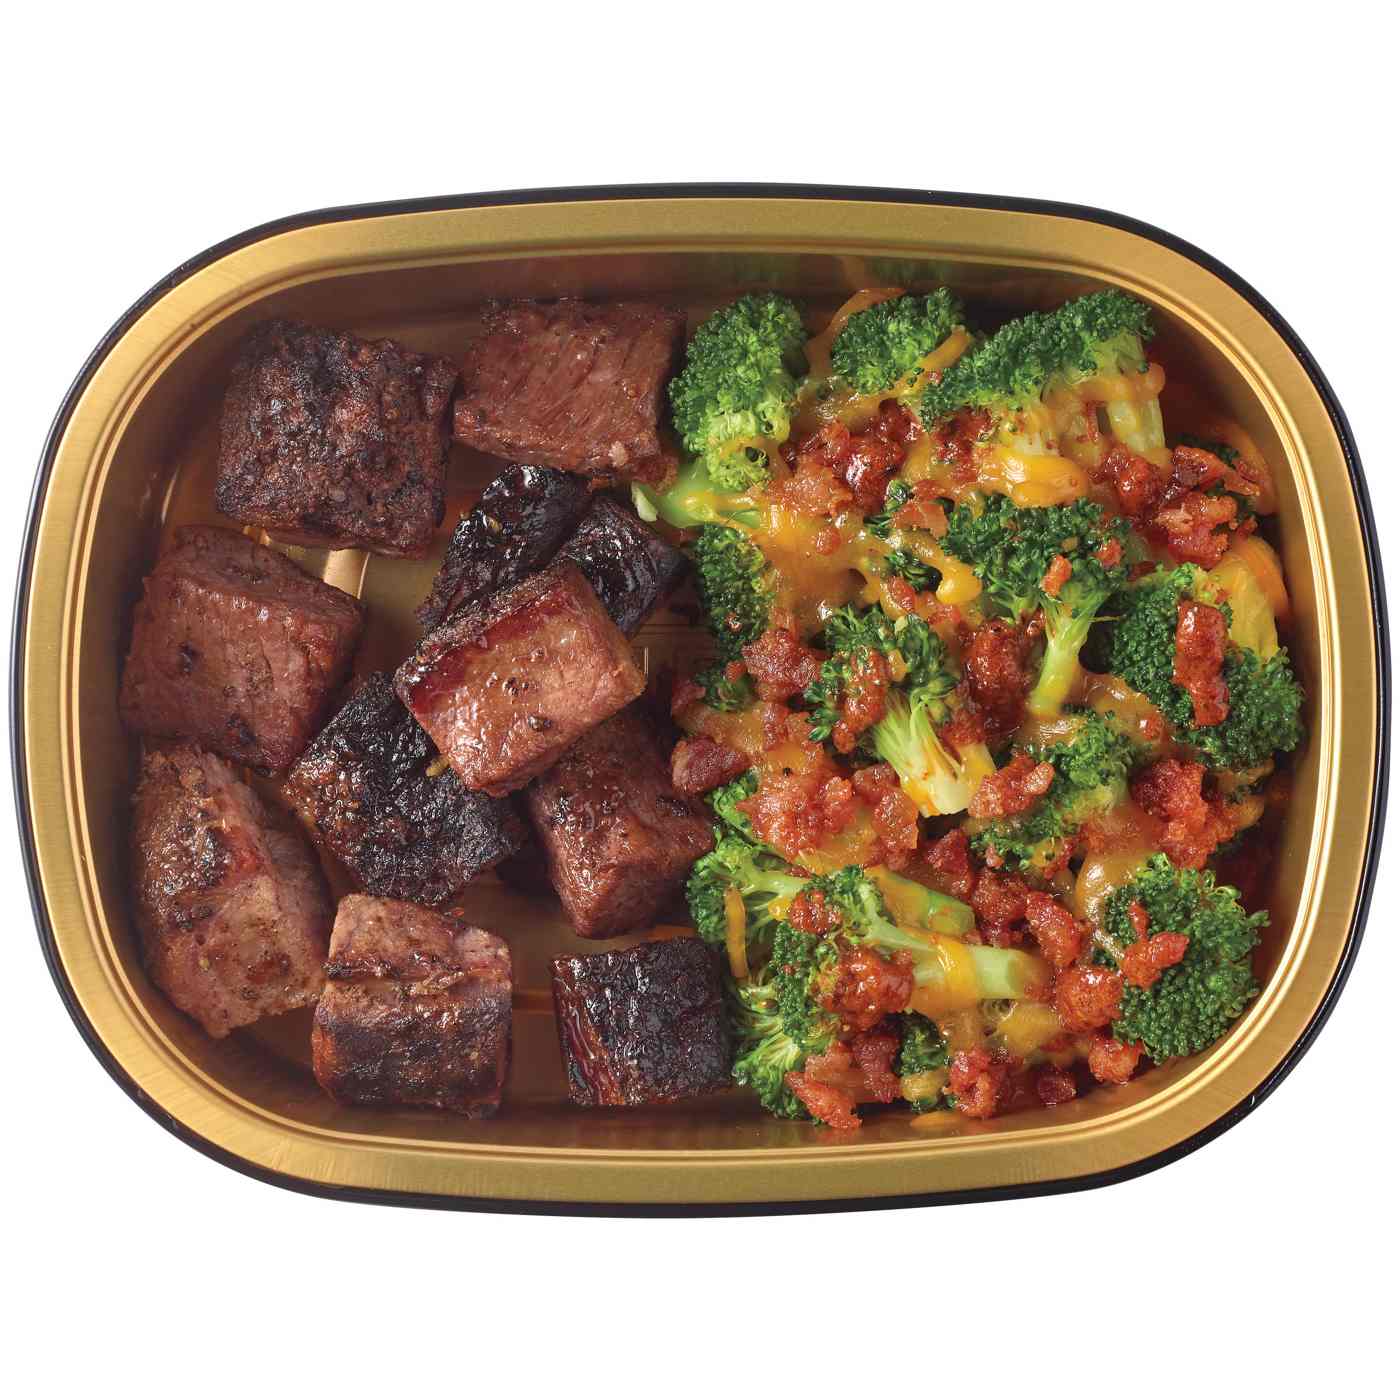 Meal Simple by H-E-B Low-Carb Lifestyle Beef Brisket Burnt Ends & Broccoli; image 3 of 3